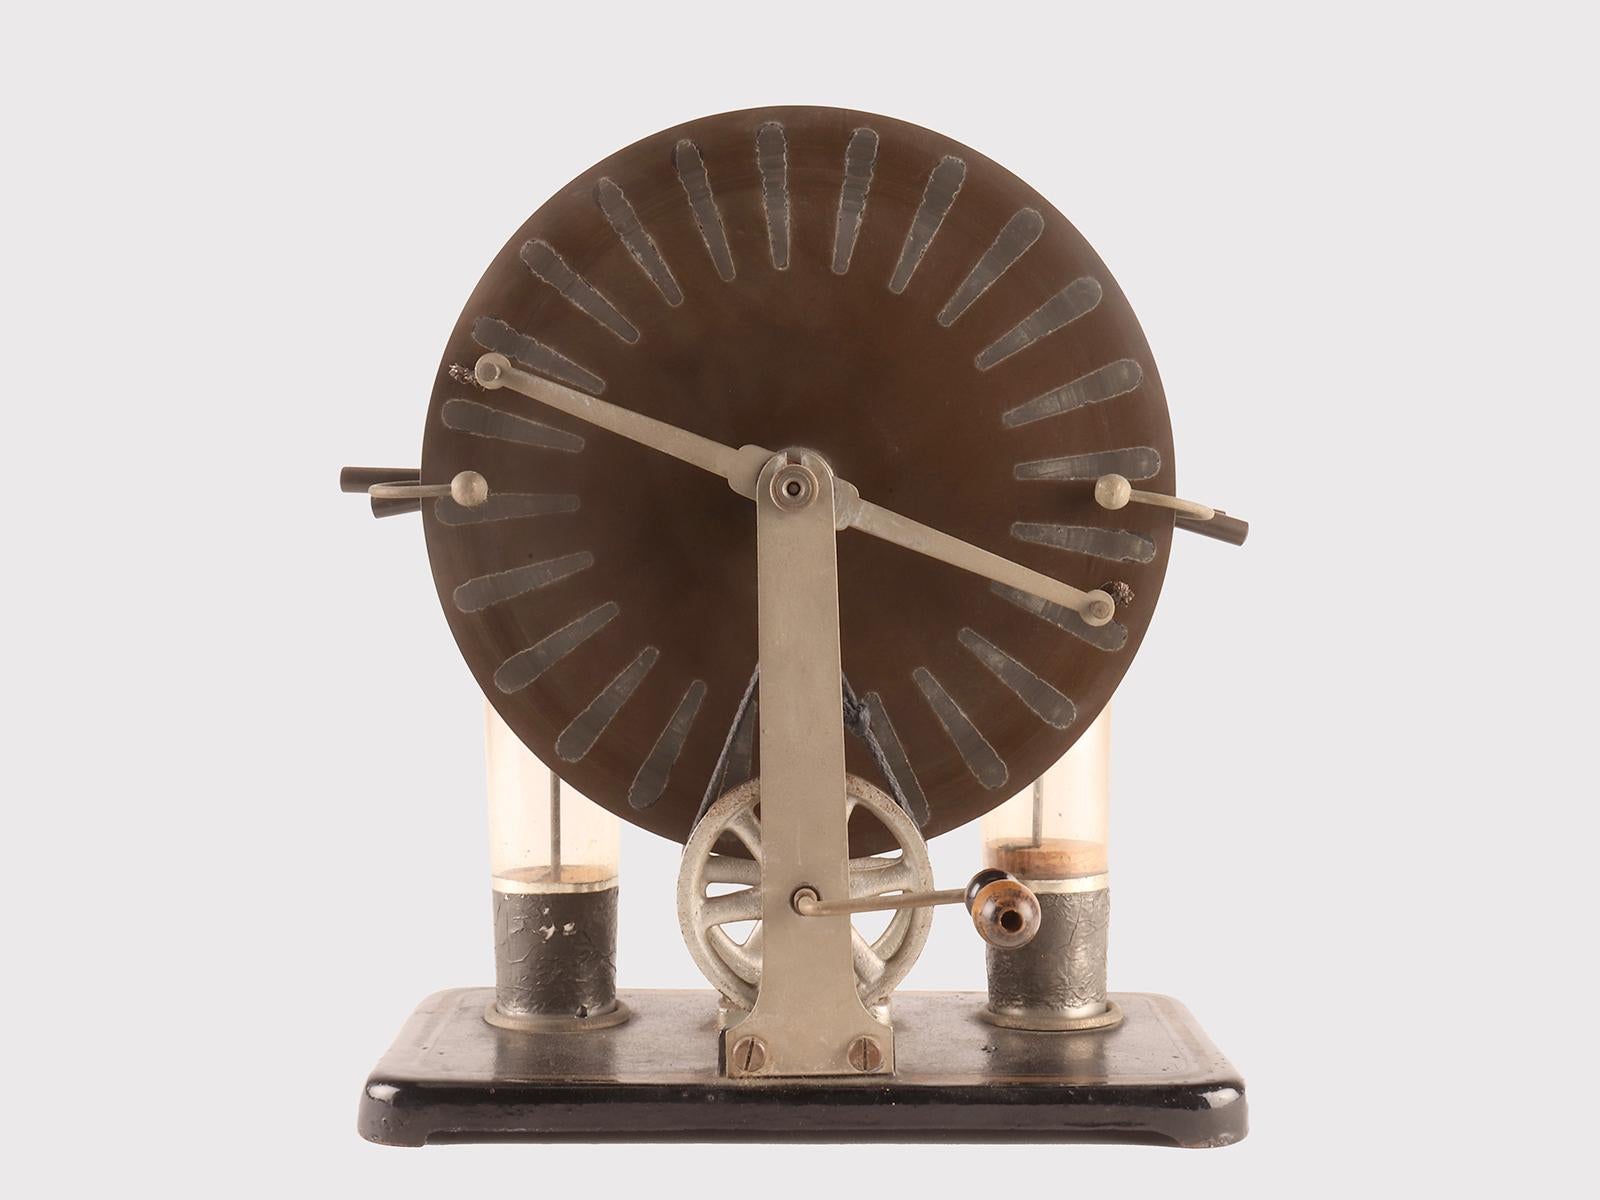 Electrostatic machine by Wimshurst, a British engineer and shipowner, designed in the 1880s, created by Rinaldo Damiani, a builder active in Venice between the end of the nineteenth century and the beginning of the twentieth century. This generator